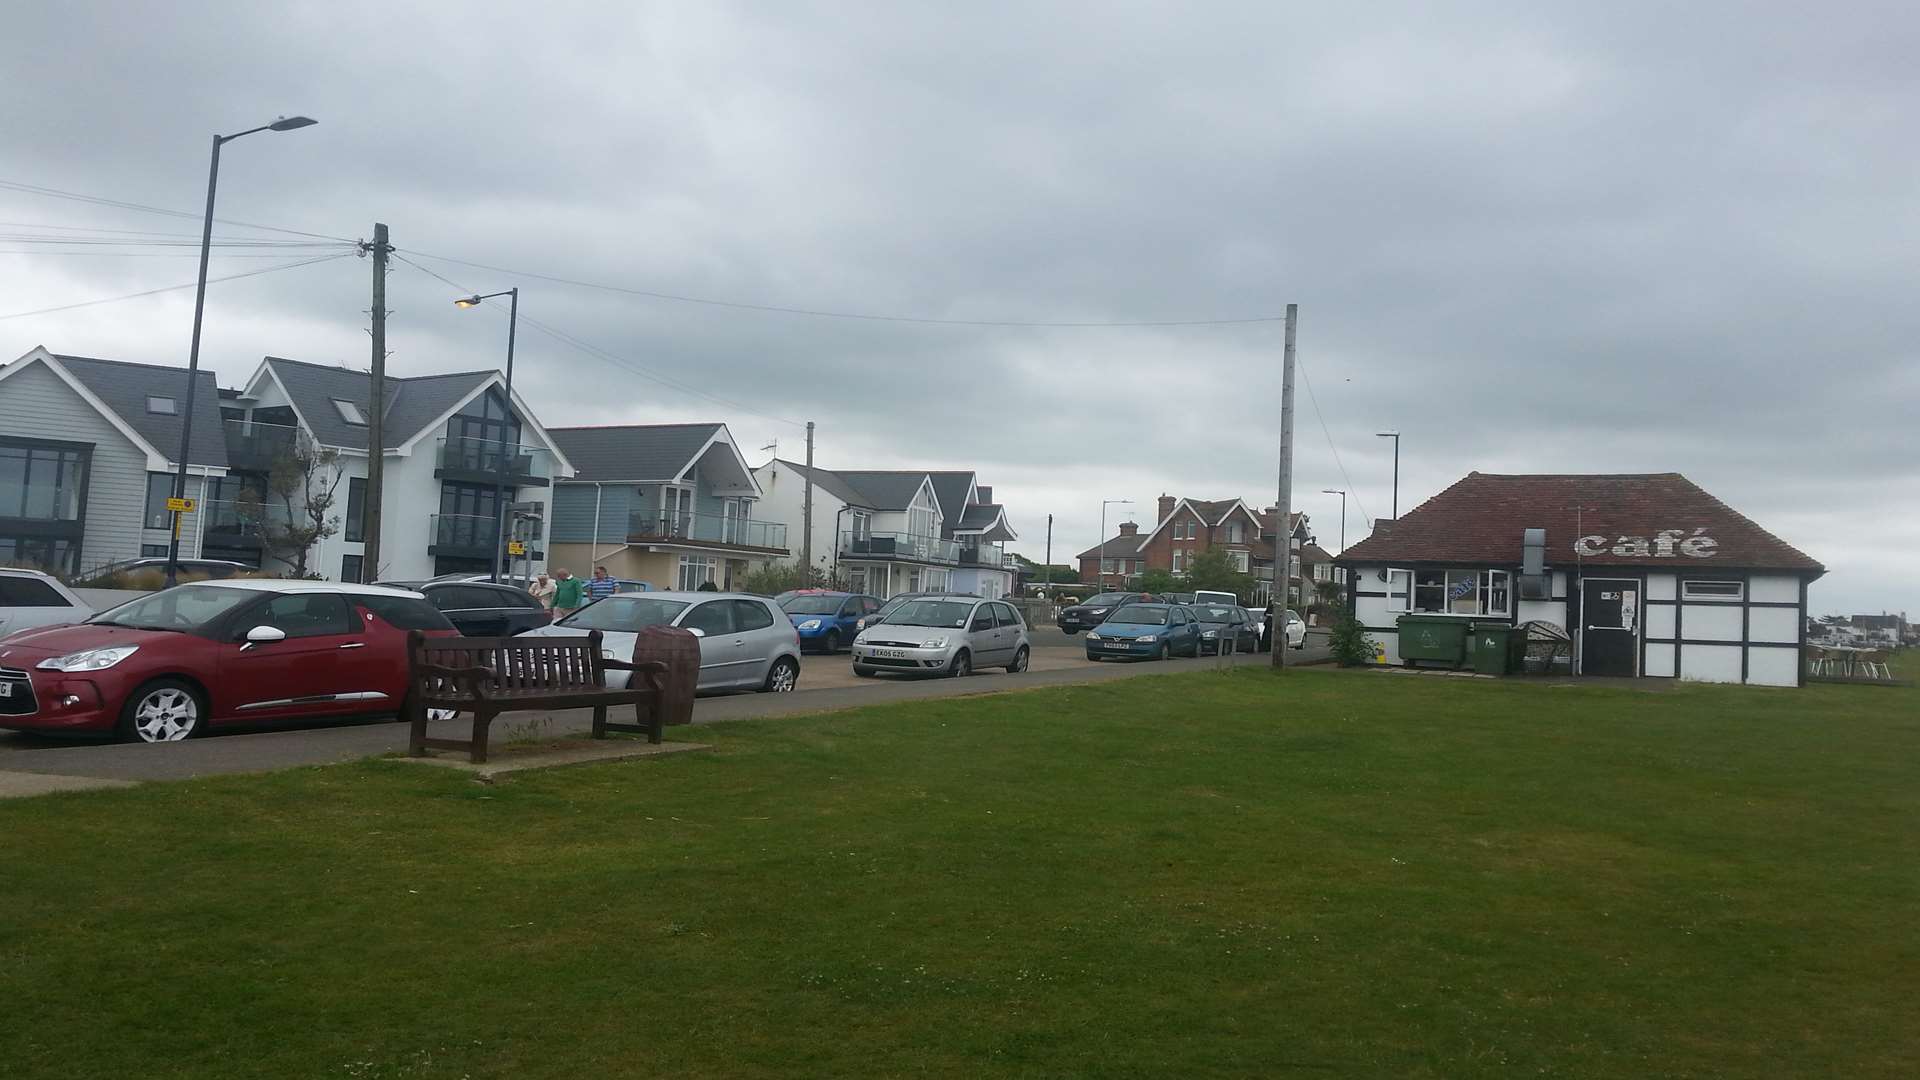 The youths gathered at Marine Parade, on the junction of Herne Bay Road